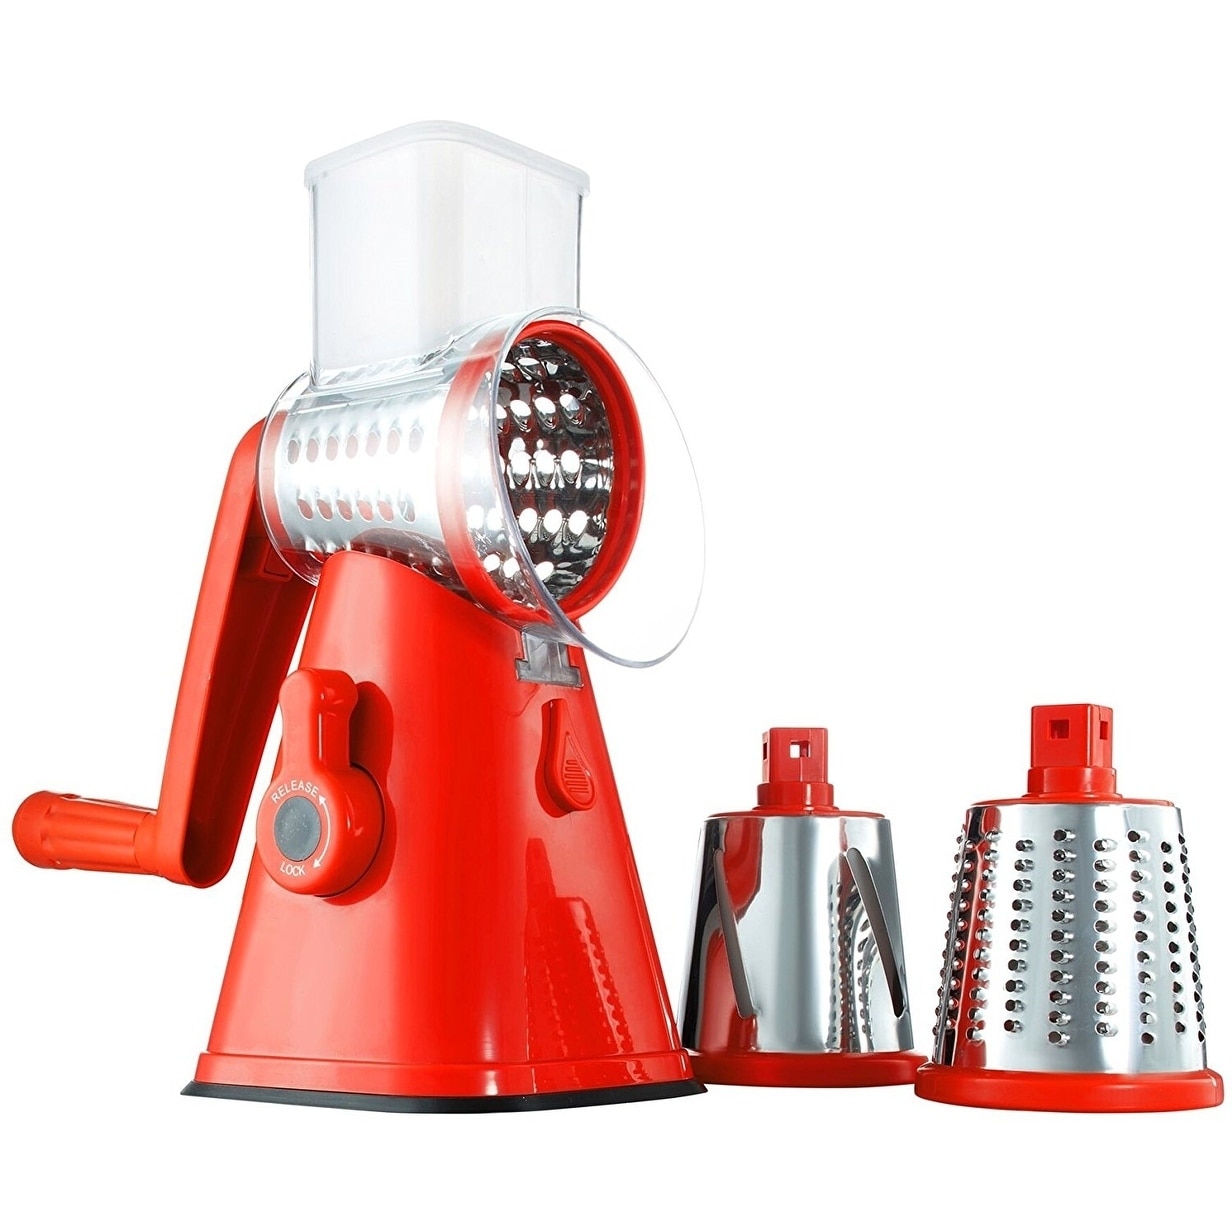 Kitchen HQ Speed Grater and Slicer with Suction Base II 